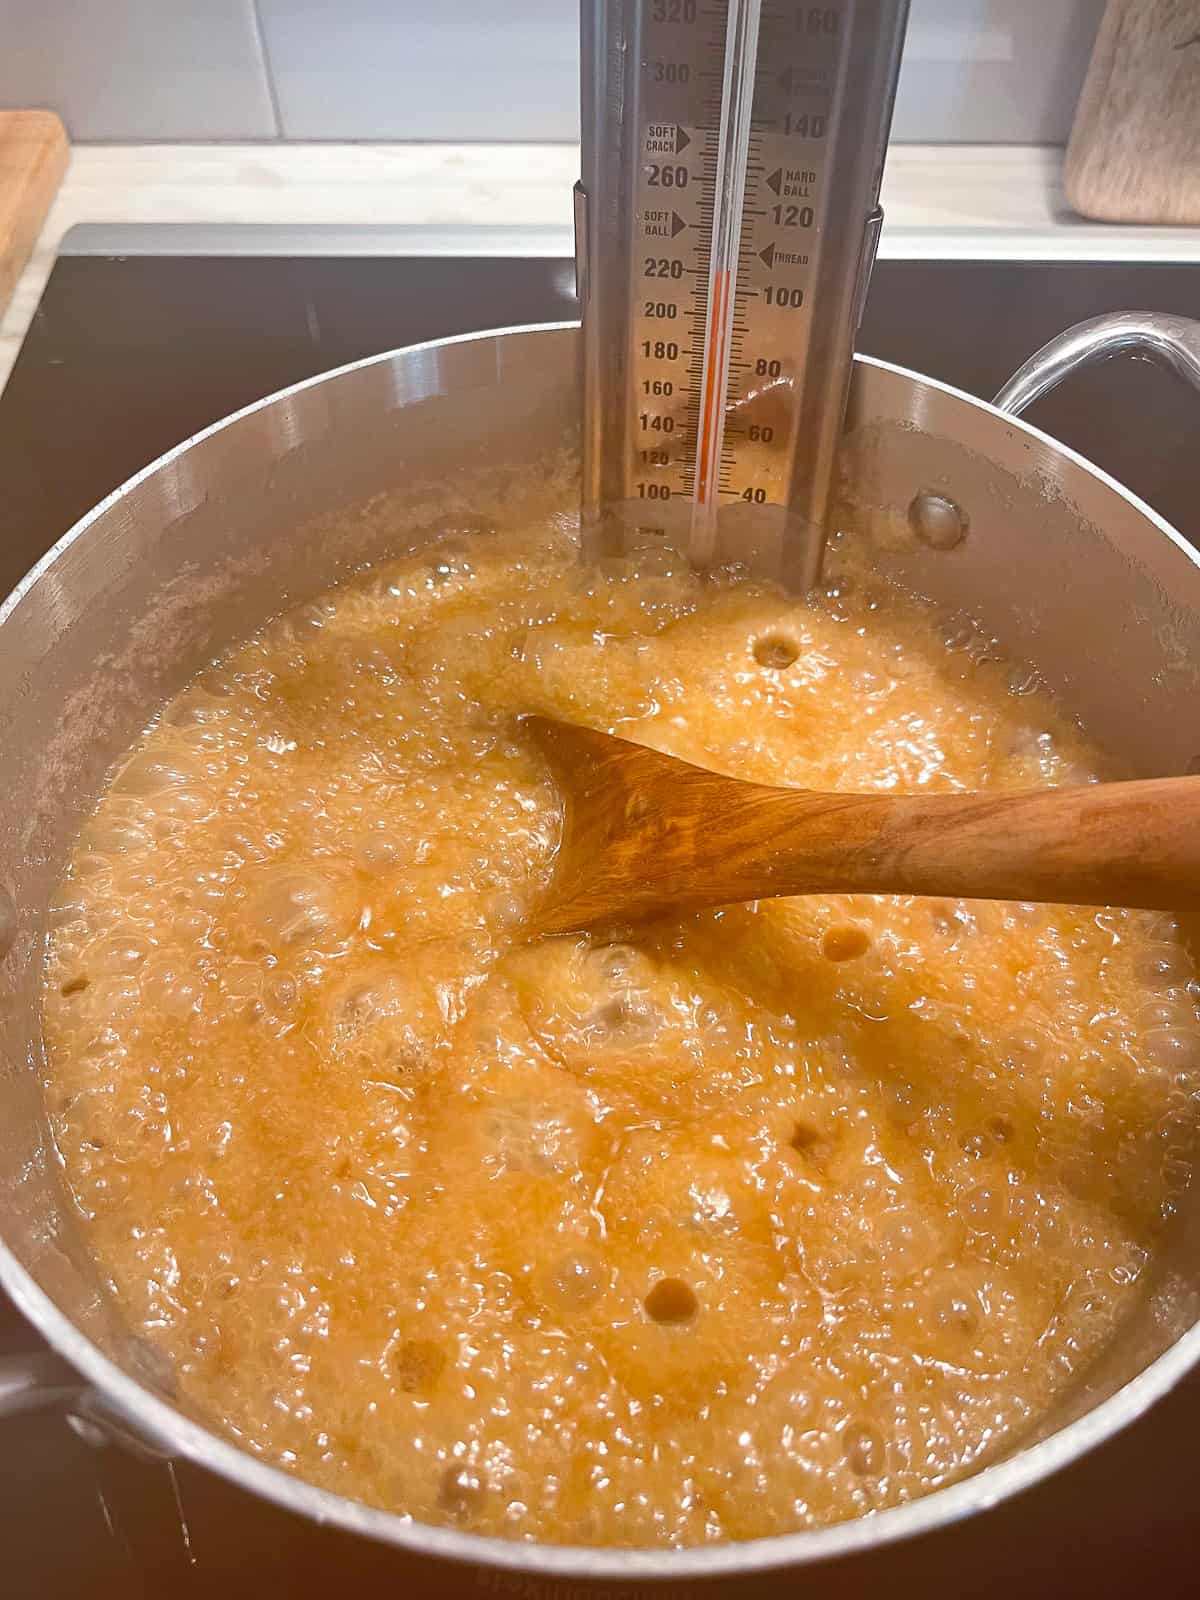 The caramel in the pan, bubbling to 220 degrees.